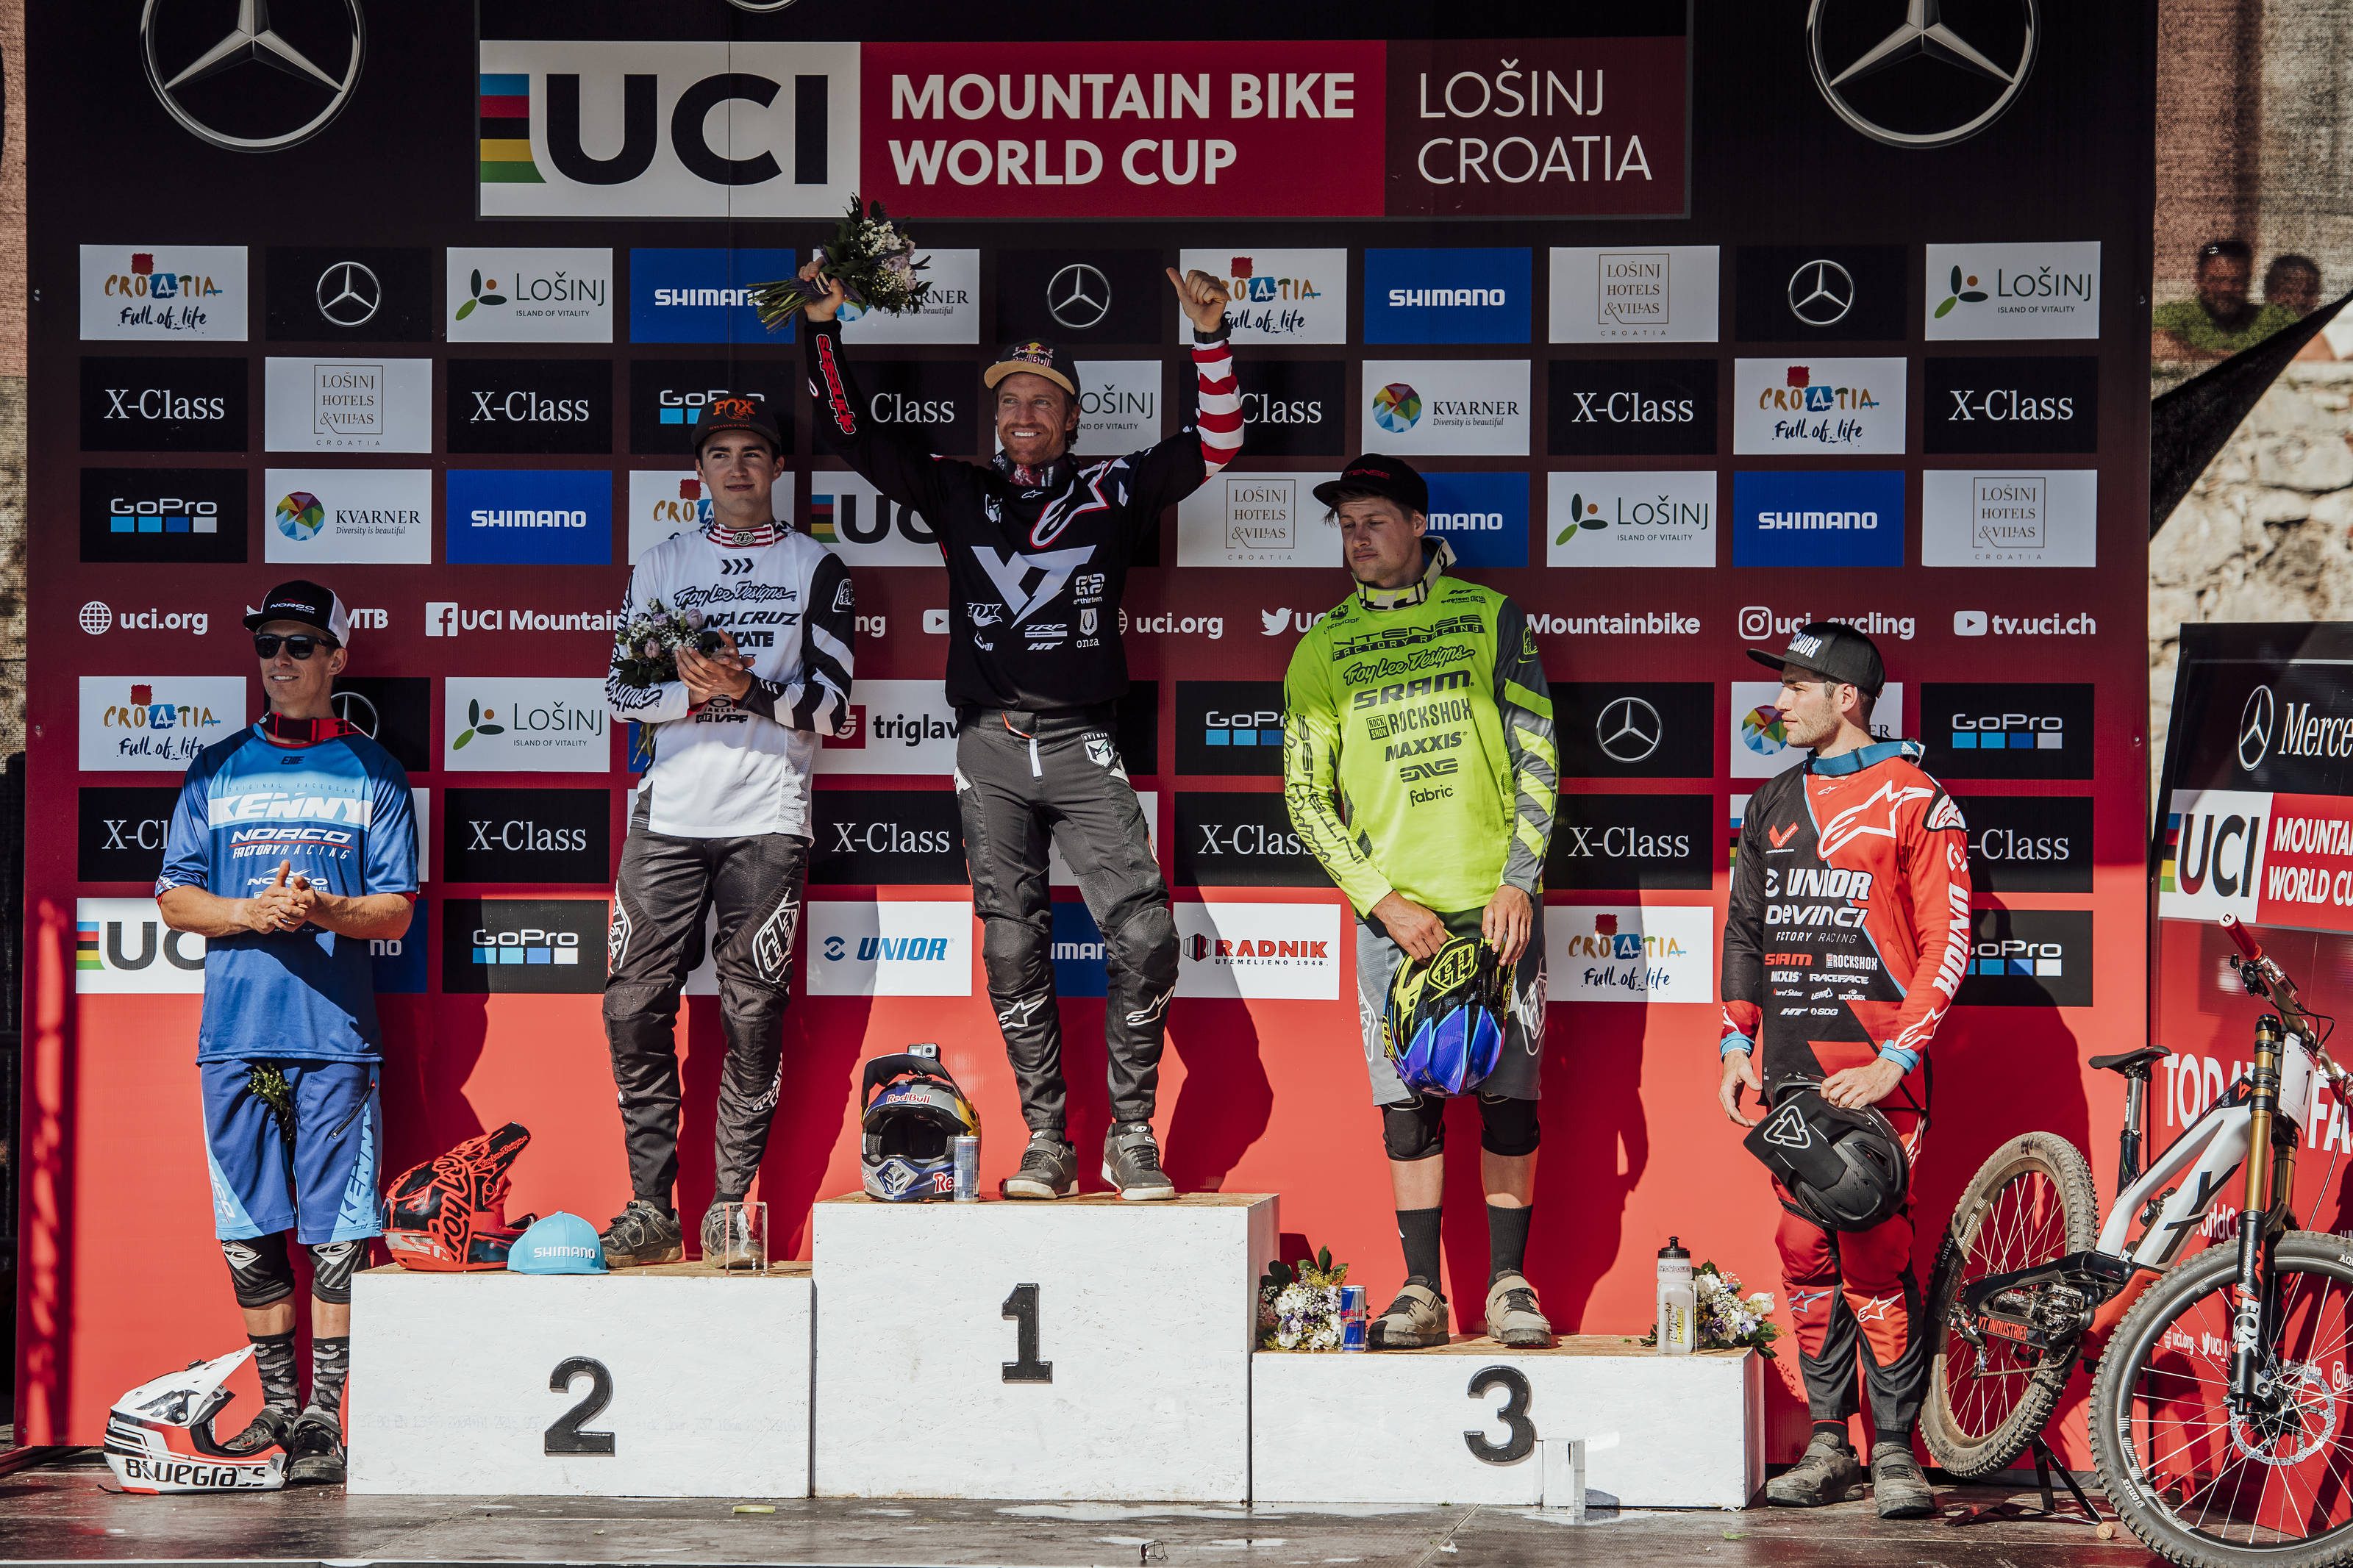 2018 dh world cup results